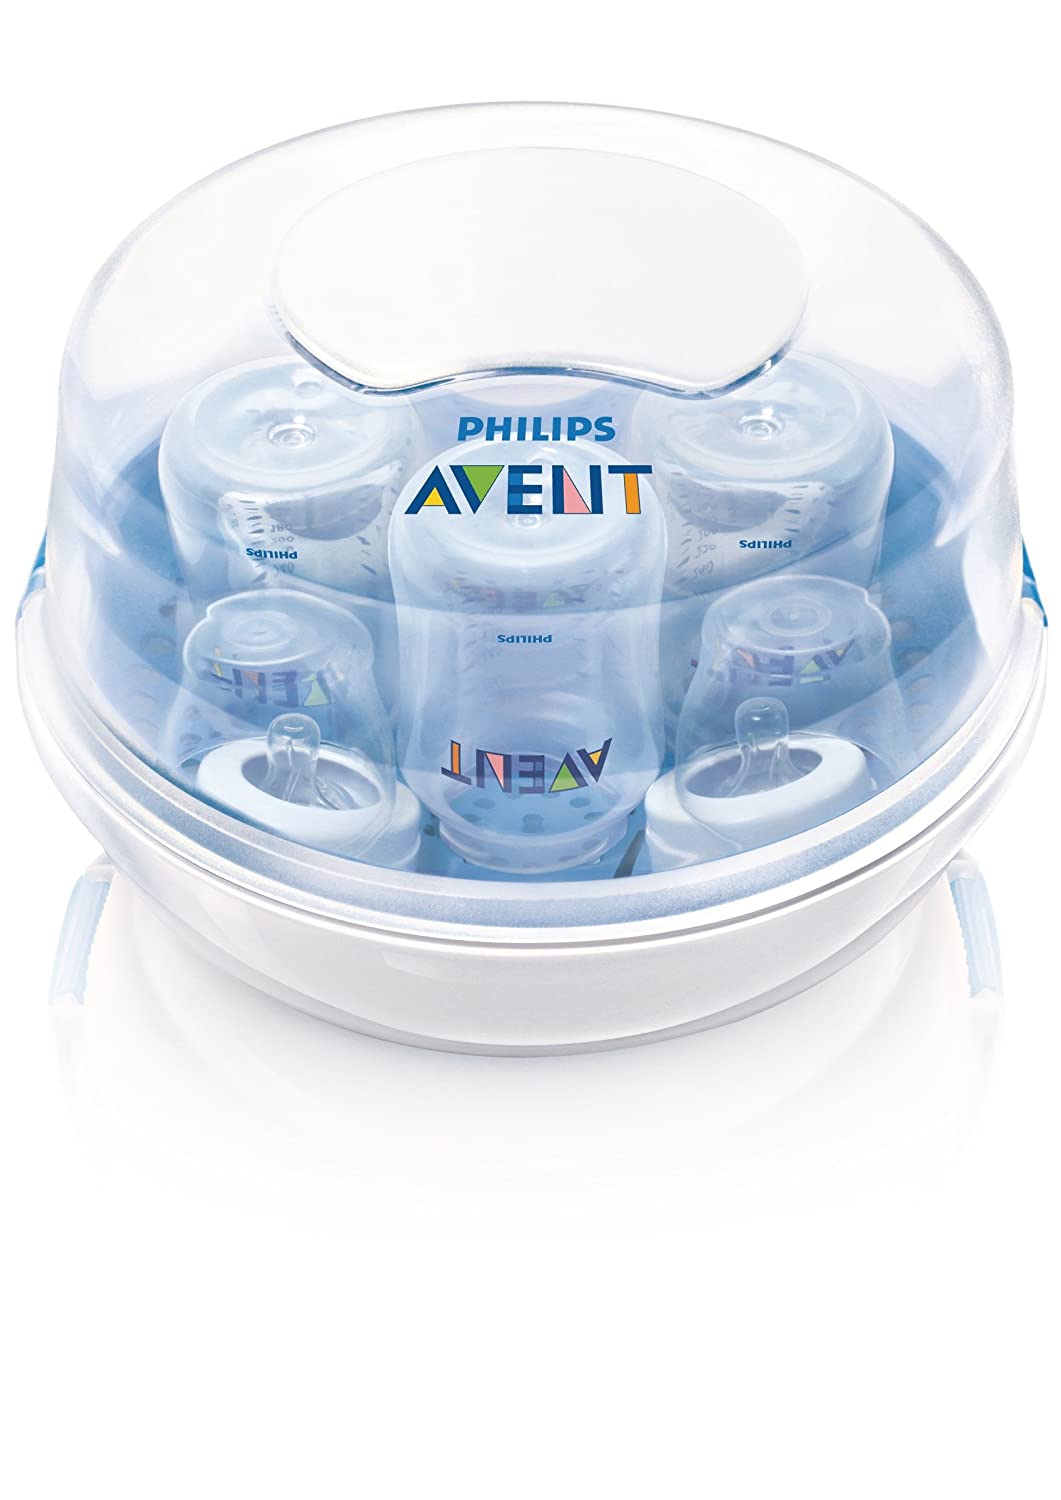 Philips Avent Microwave Steam Sterilizer (for Baby Bottles, Pacifiers, Cups and More) $15.79 + Free Shipping w/ Prime or $25+